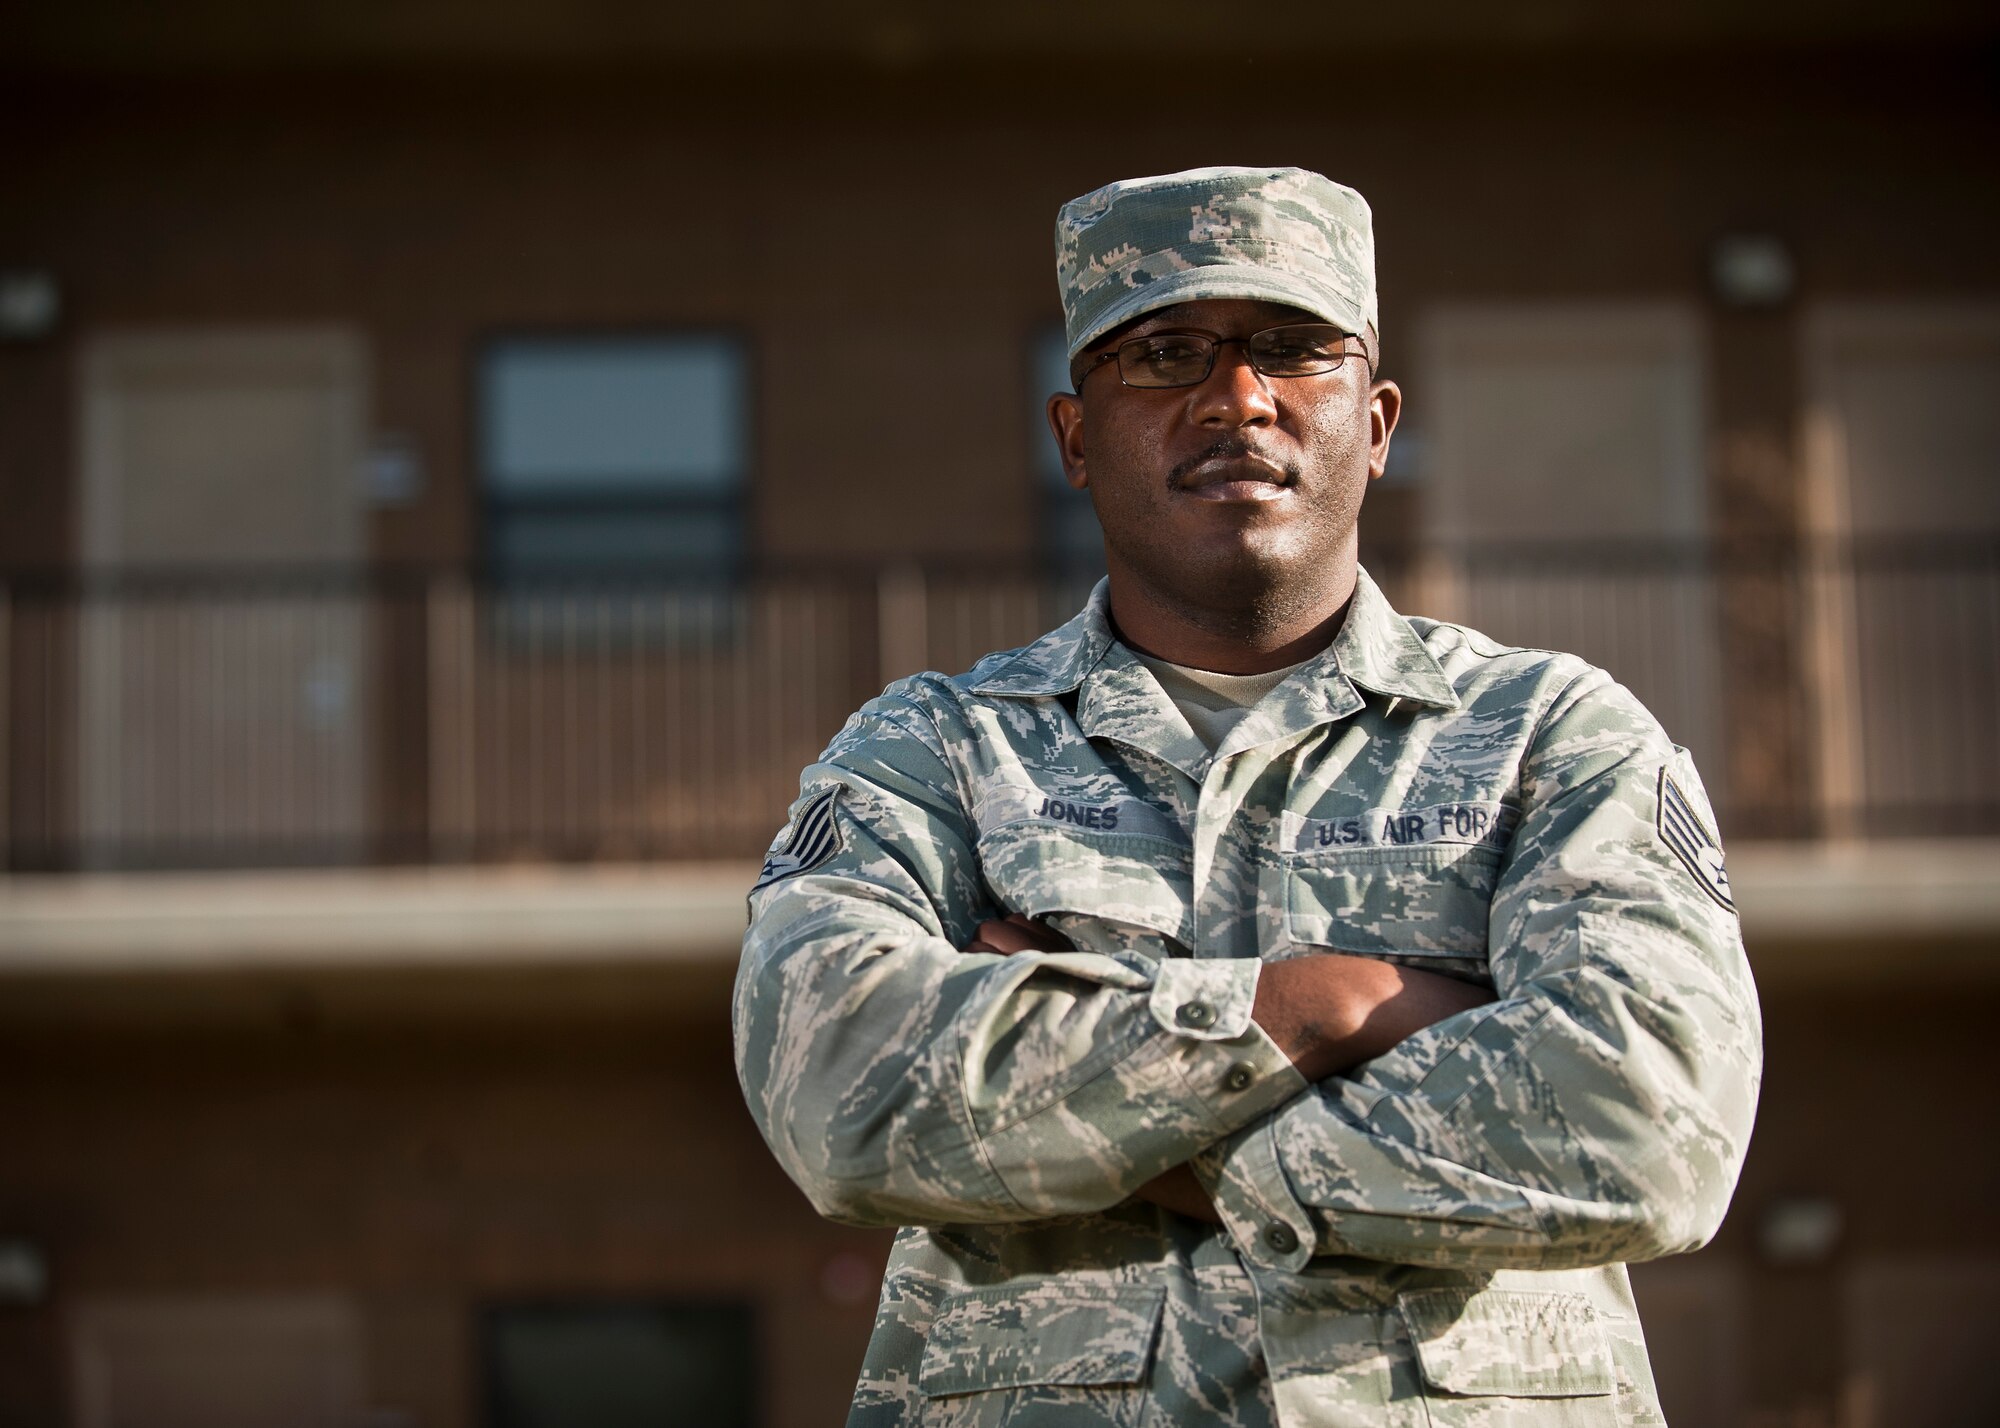 Staff Sgt. Council Jones, 99th Civil Engineer Squadron airman dormitory leader, poses for a photo in front of a dorm on Nellis Air Force Base, Nev., April 7, 2015. As a young Airman, Jones spent 30 days in a correctional confinement facility for an expletive-laced rant directed toward his squadron leadership, but has overcome that past adversity to have a successful Air Force career in which he has won numerous Airman of the Quarter awards and the 52nd Fighter Wing’s Airman of the Year award, and has deployed to Iraq and Afghanistan as a security forces member. (U.S. Air Force photo by Staff Sgt. Siuta B. Ika)